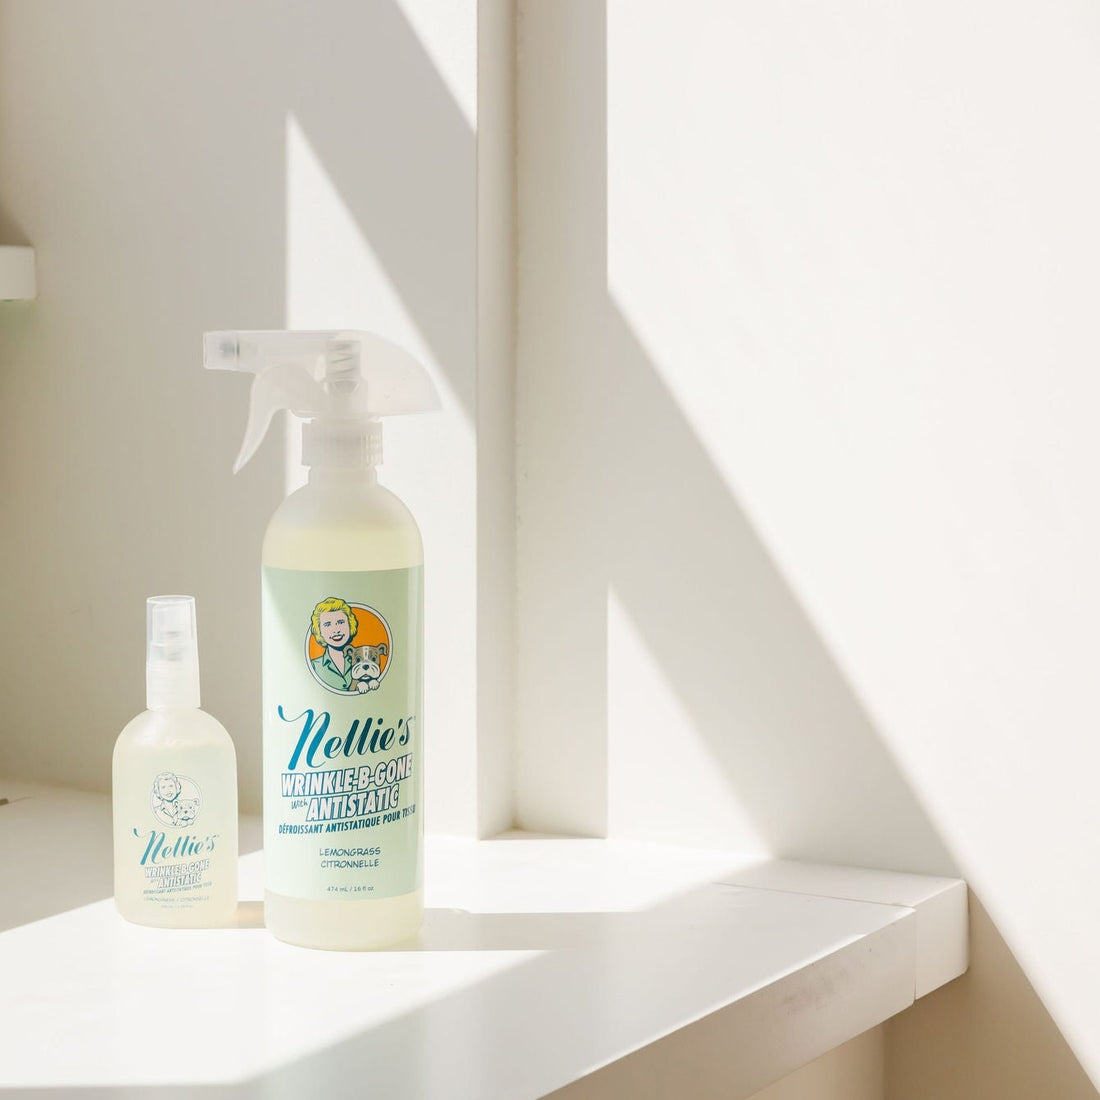 Large plastic bottle and small glass bottle of Nellie's Wrinkle-B-Gone in window